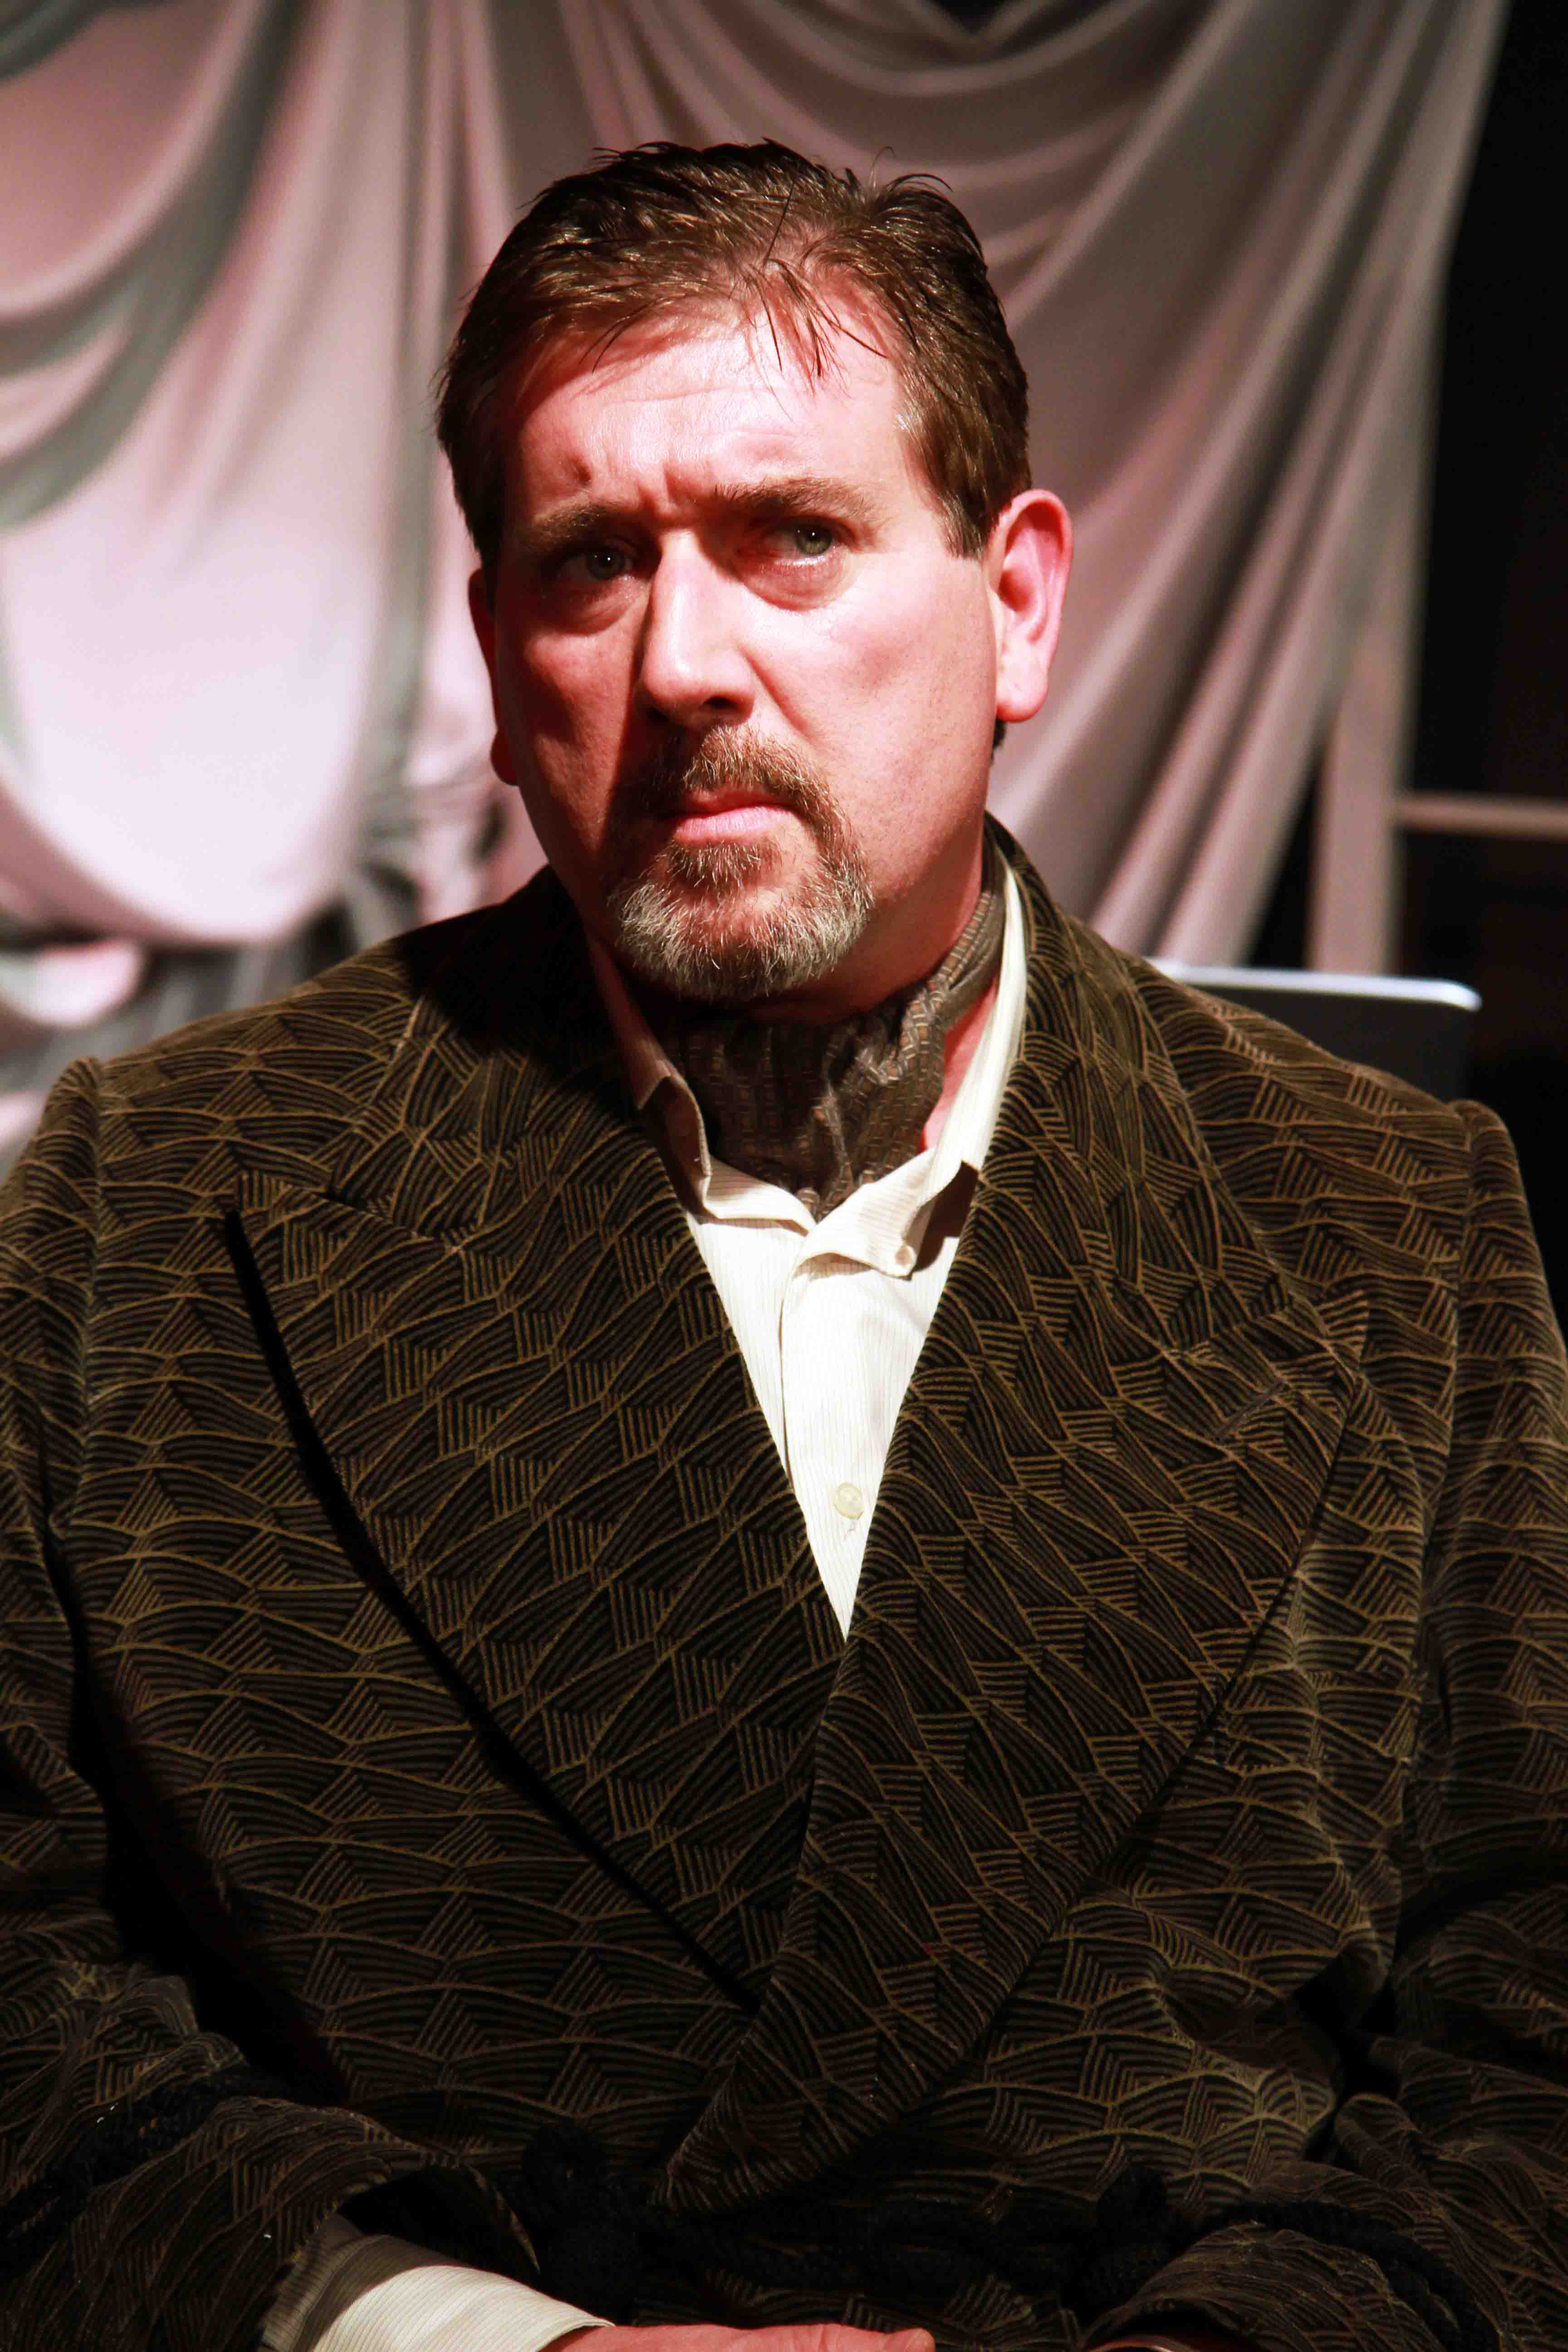 GARY HERON As Hugh Moncrieffe in CHASING BECKETT at The London Theatre 2012